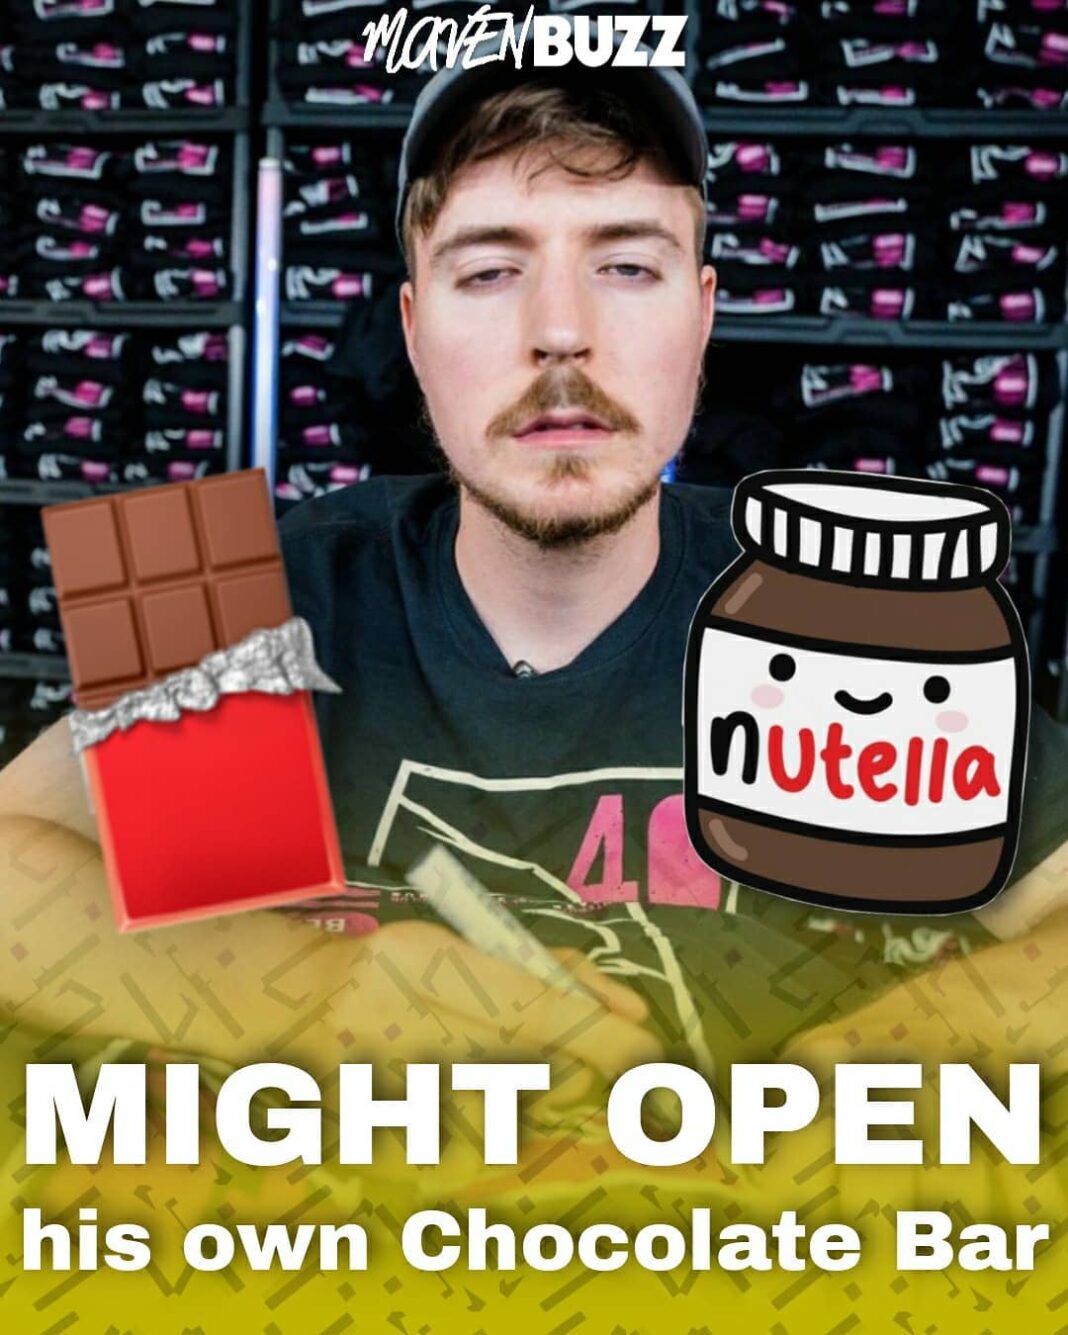 MrBeast might launch his own Chocolate Bar - Maven Buzz